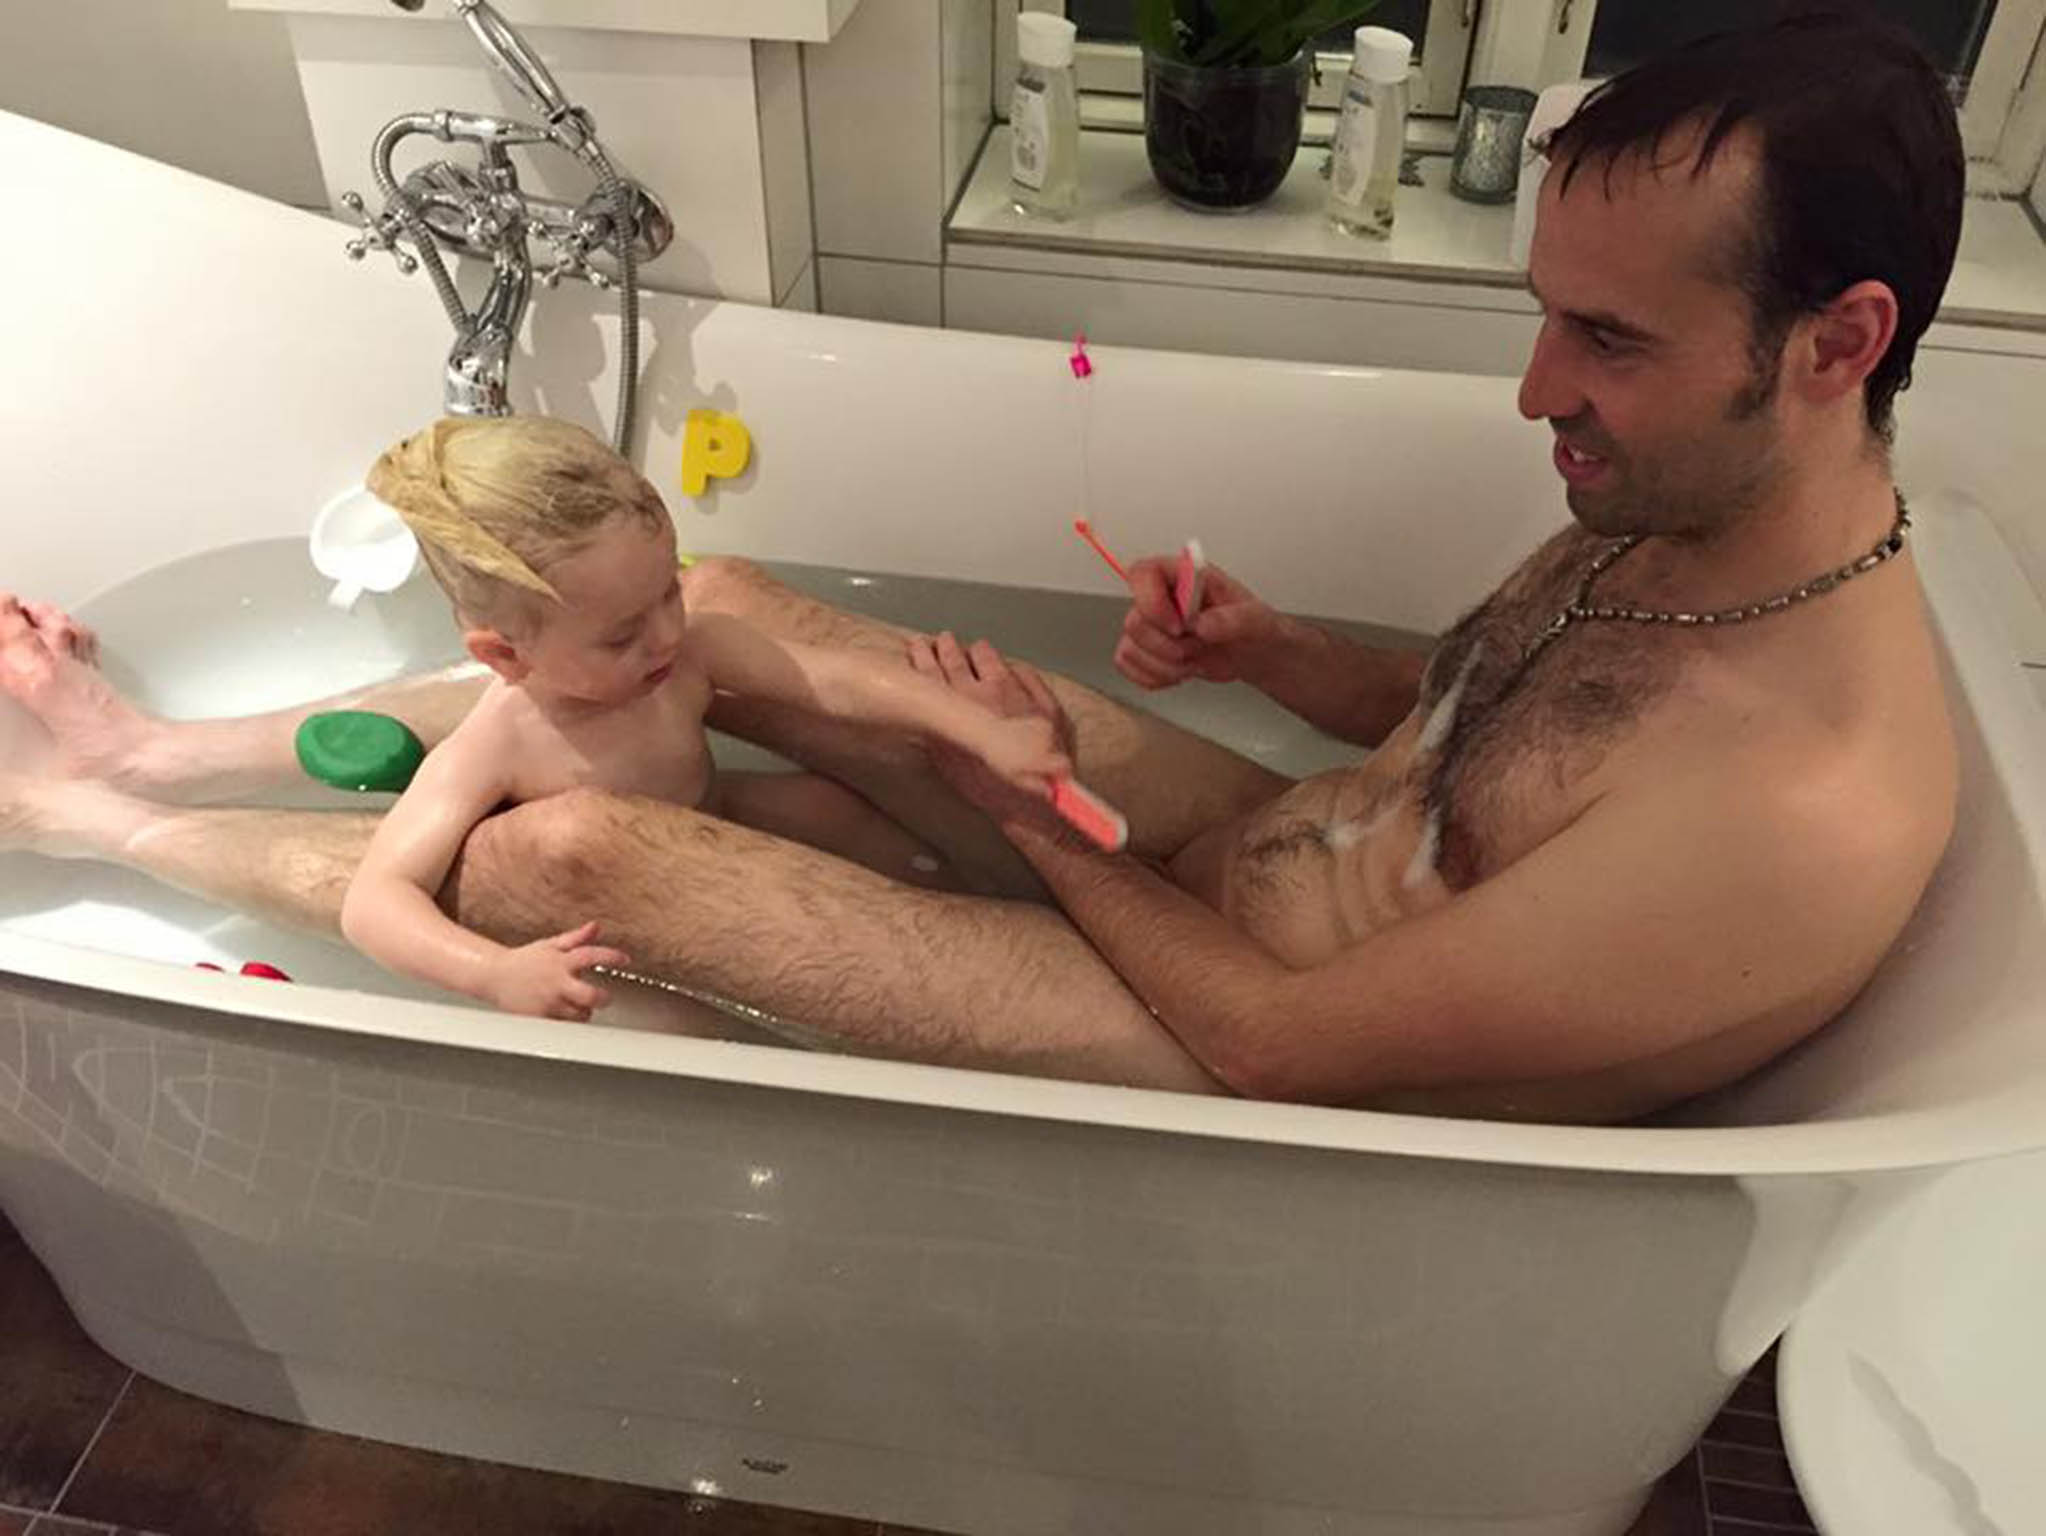 Mr Chris instead thinks that having a bath with your child is “hygge”, which is a Danish concept that means its cosy and fun, according to The Local news website